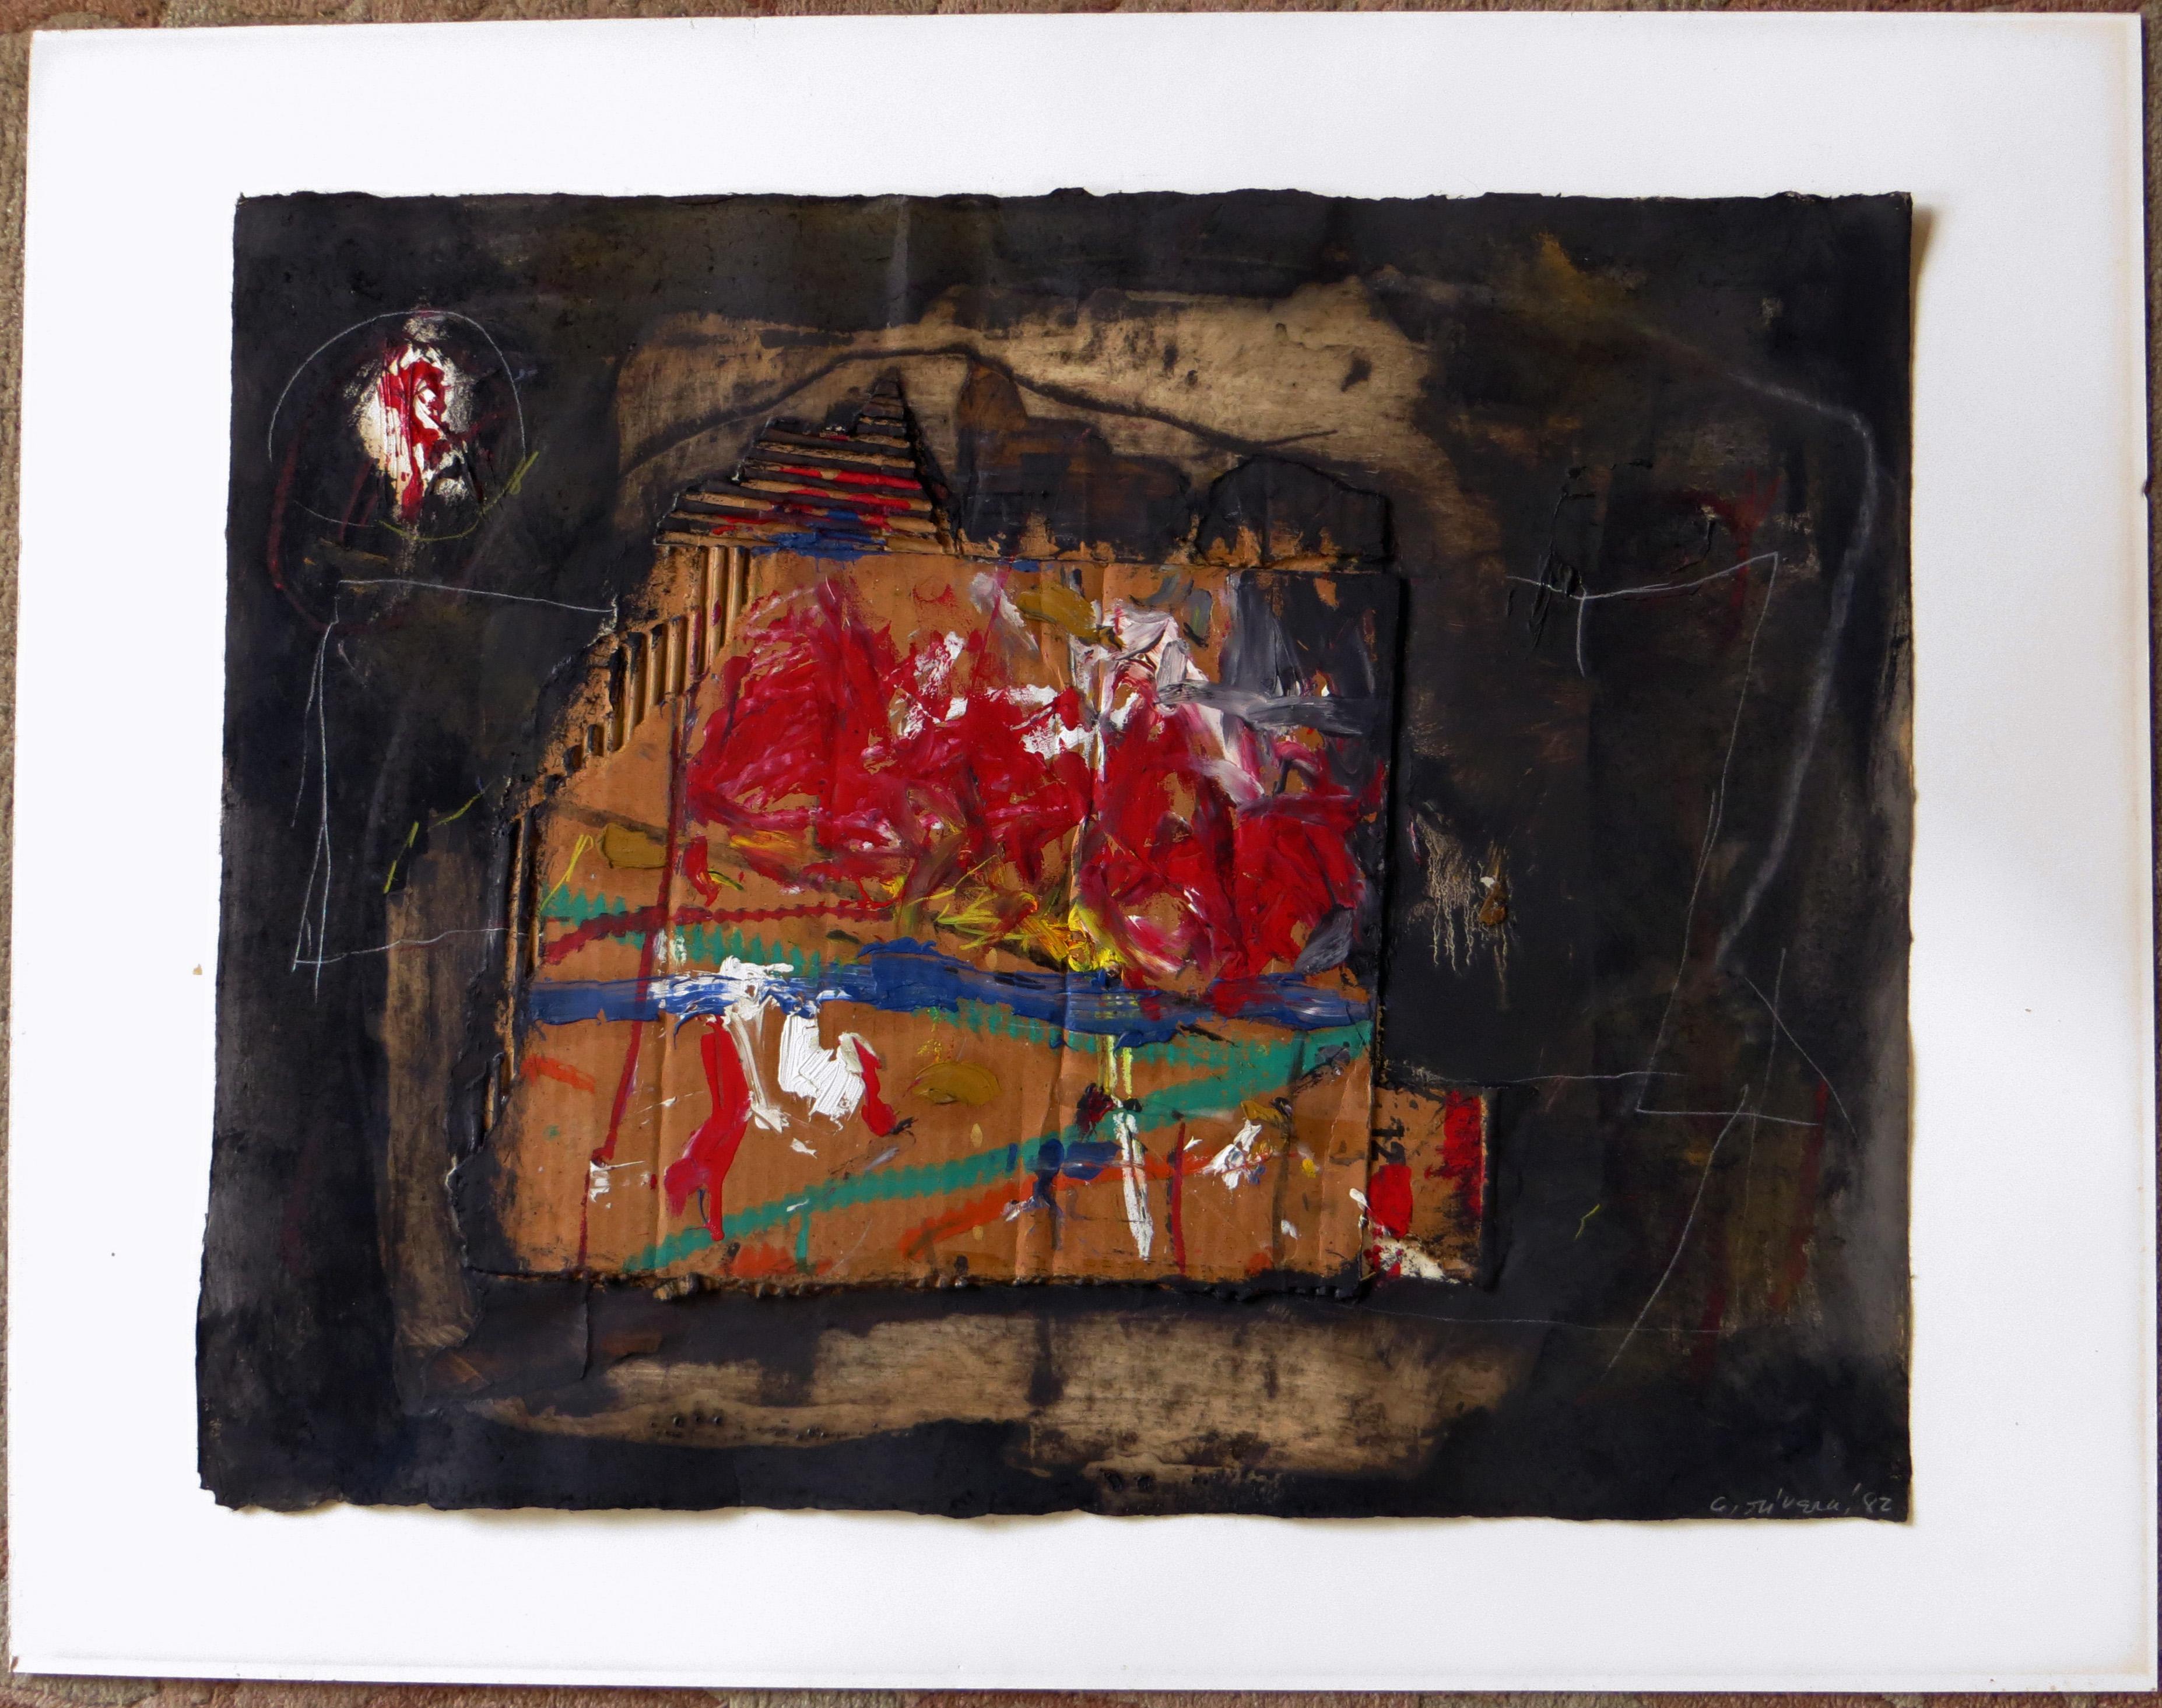 This vibrant abstract work is by Gustavo Ramos Rivera (1940-) The work is a mixed media composition on paper.  It measures 20.5 x 26.5 inches. It is mounted on heavy matboard that measures 26 x 33 inches. There are various techniques and materials